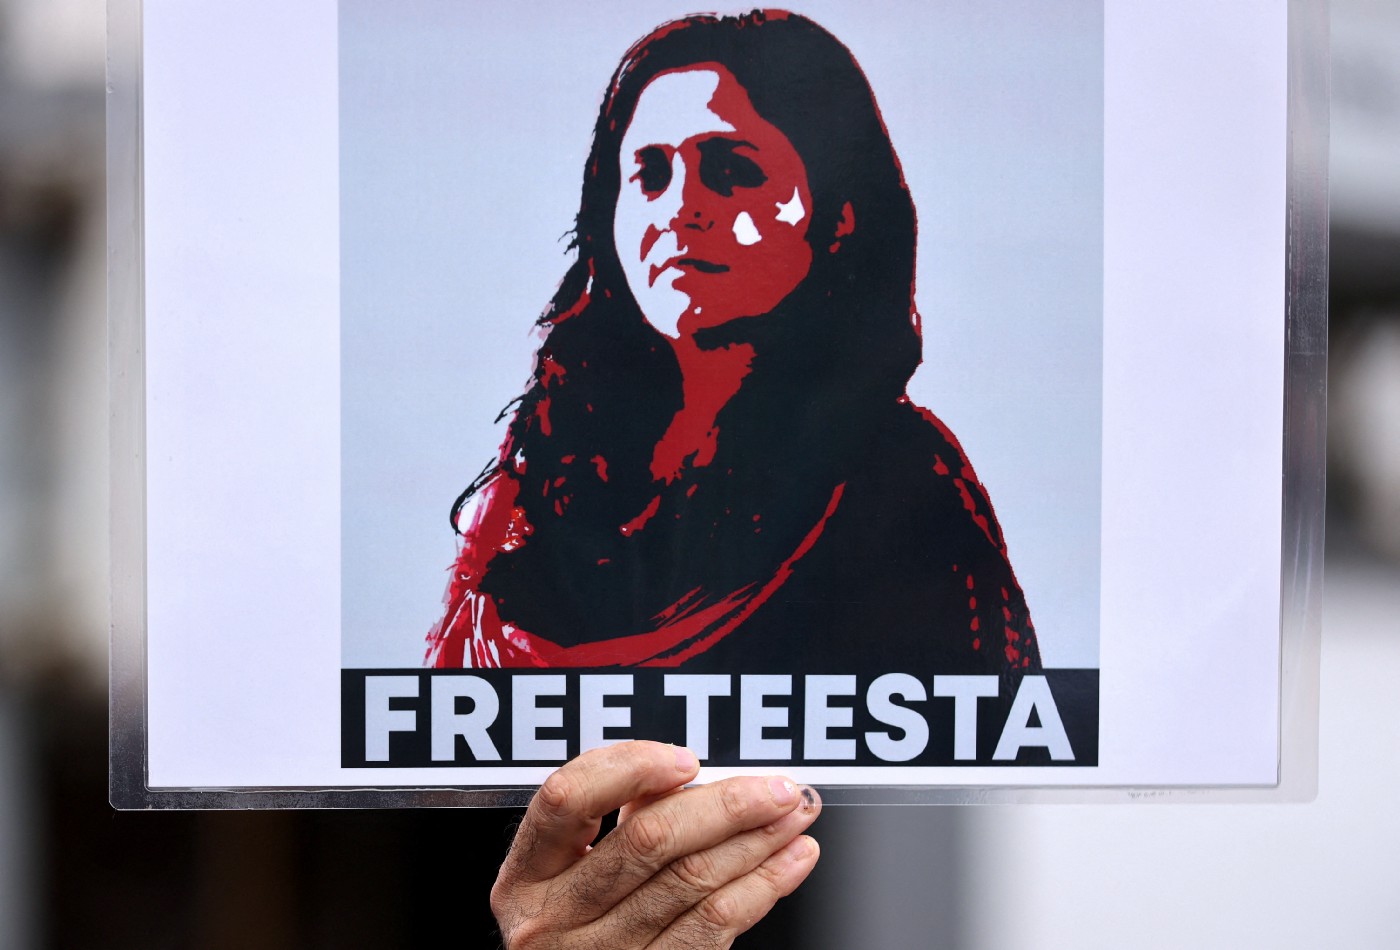 Twitter campaign targeting detained Indian activist based on misleading tweet